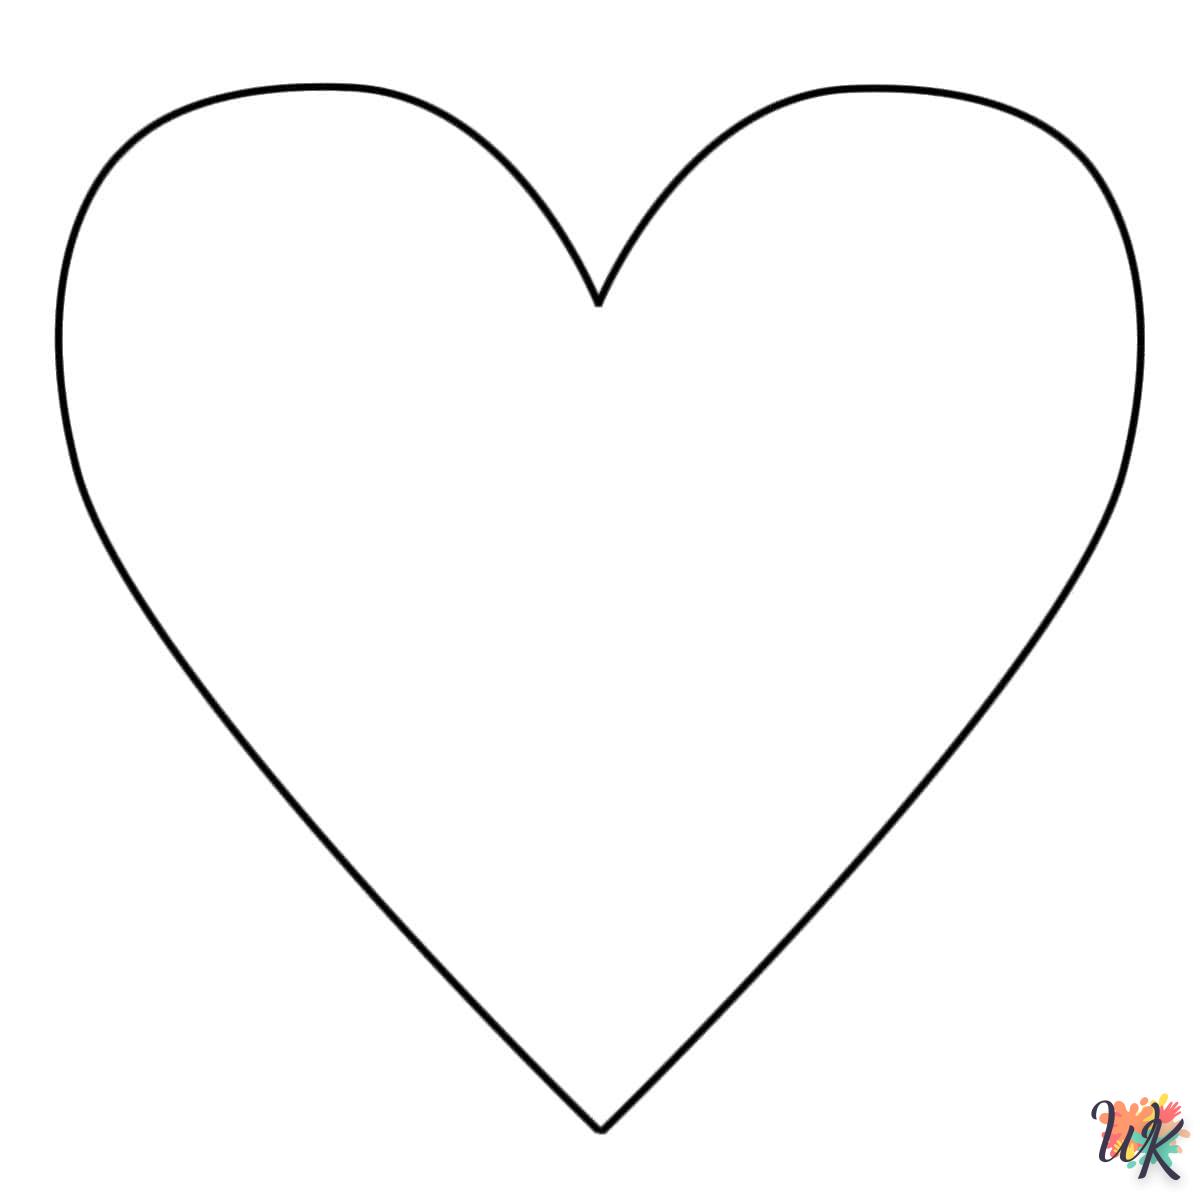 Child heart coloring page to print pdf